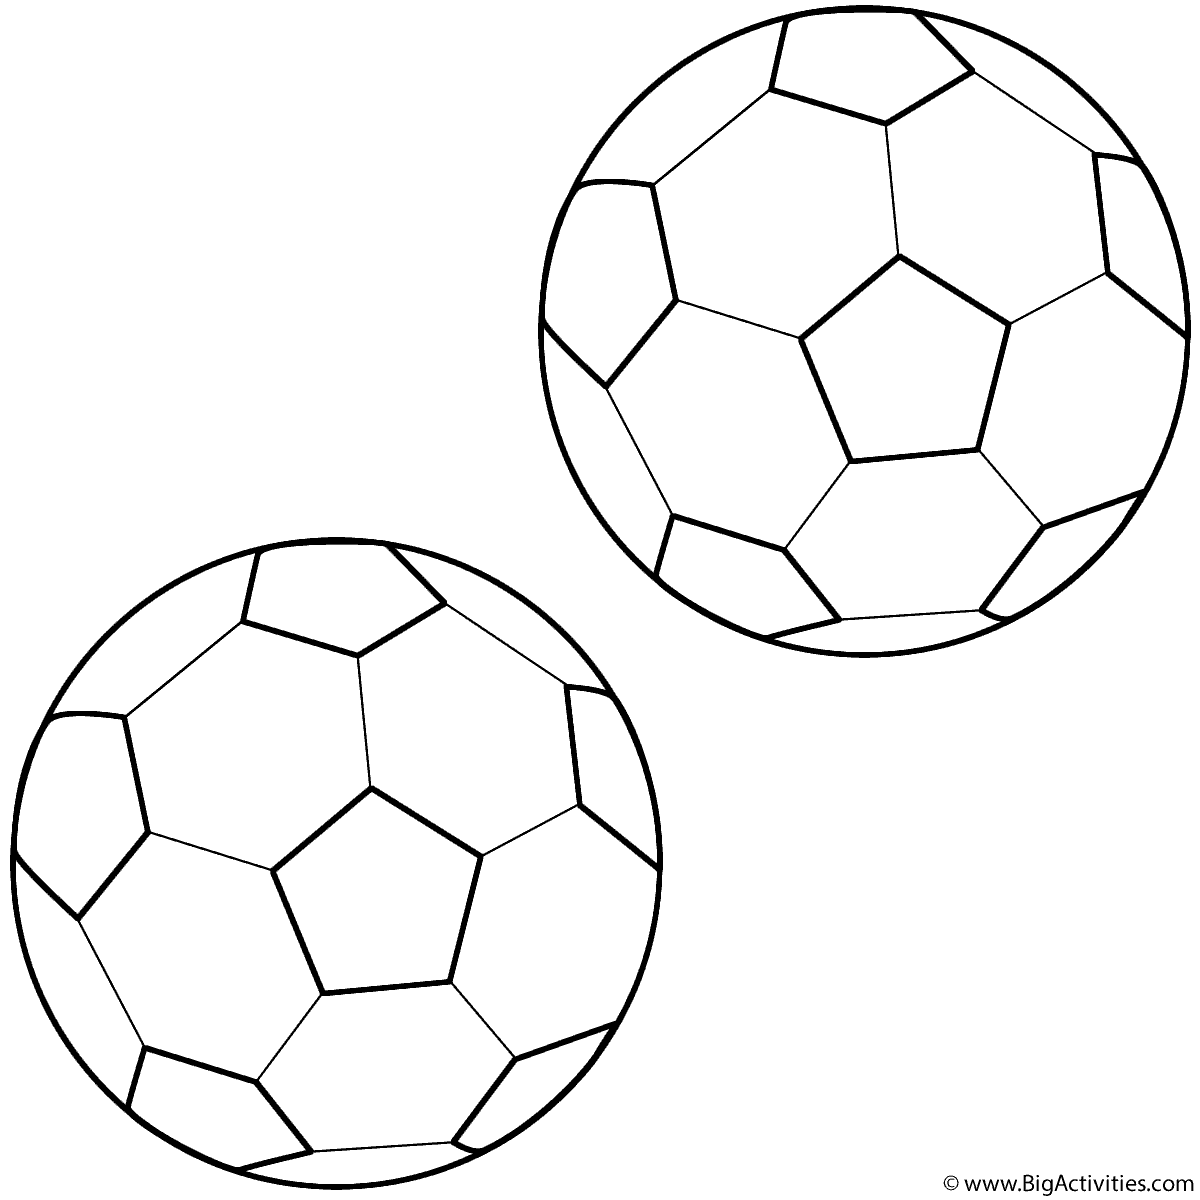 Download Soccer Balls - Coloring Page (World Cup)